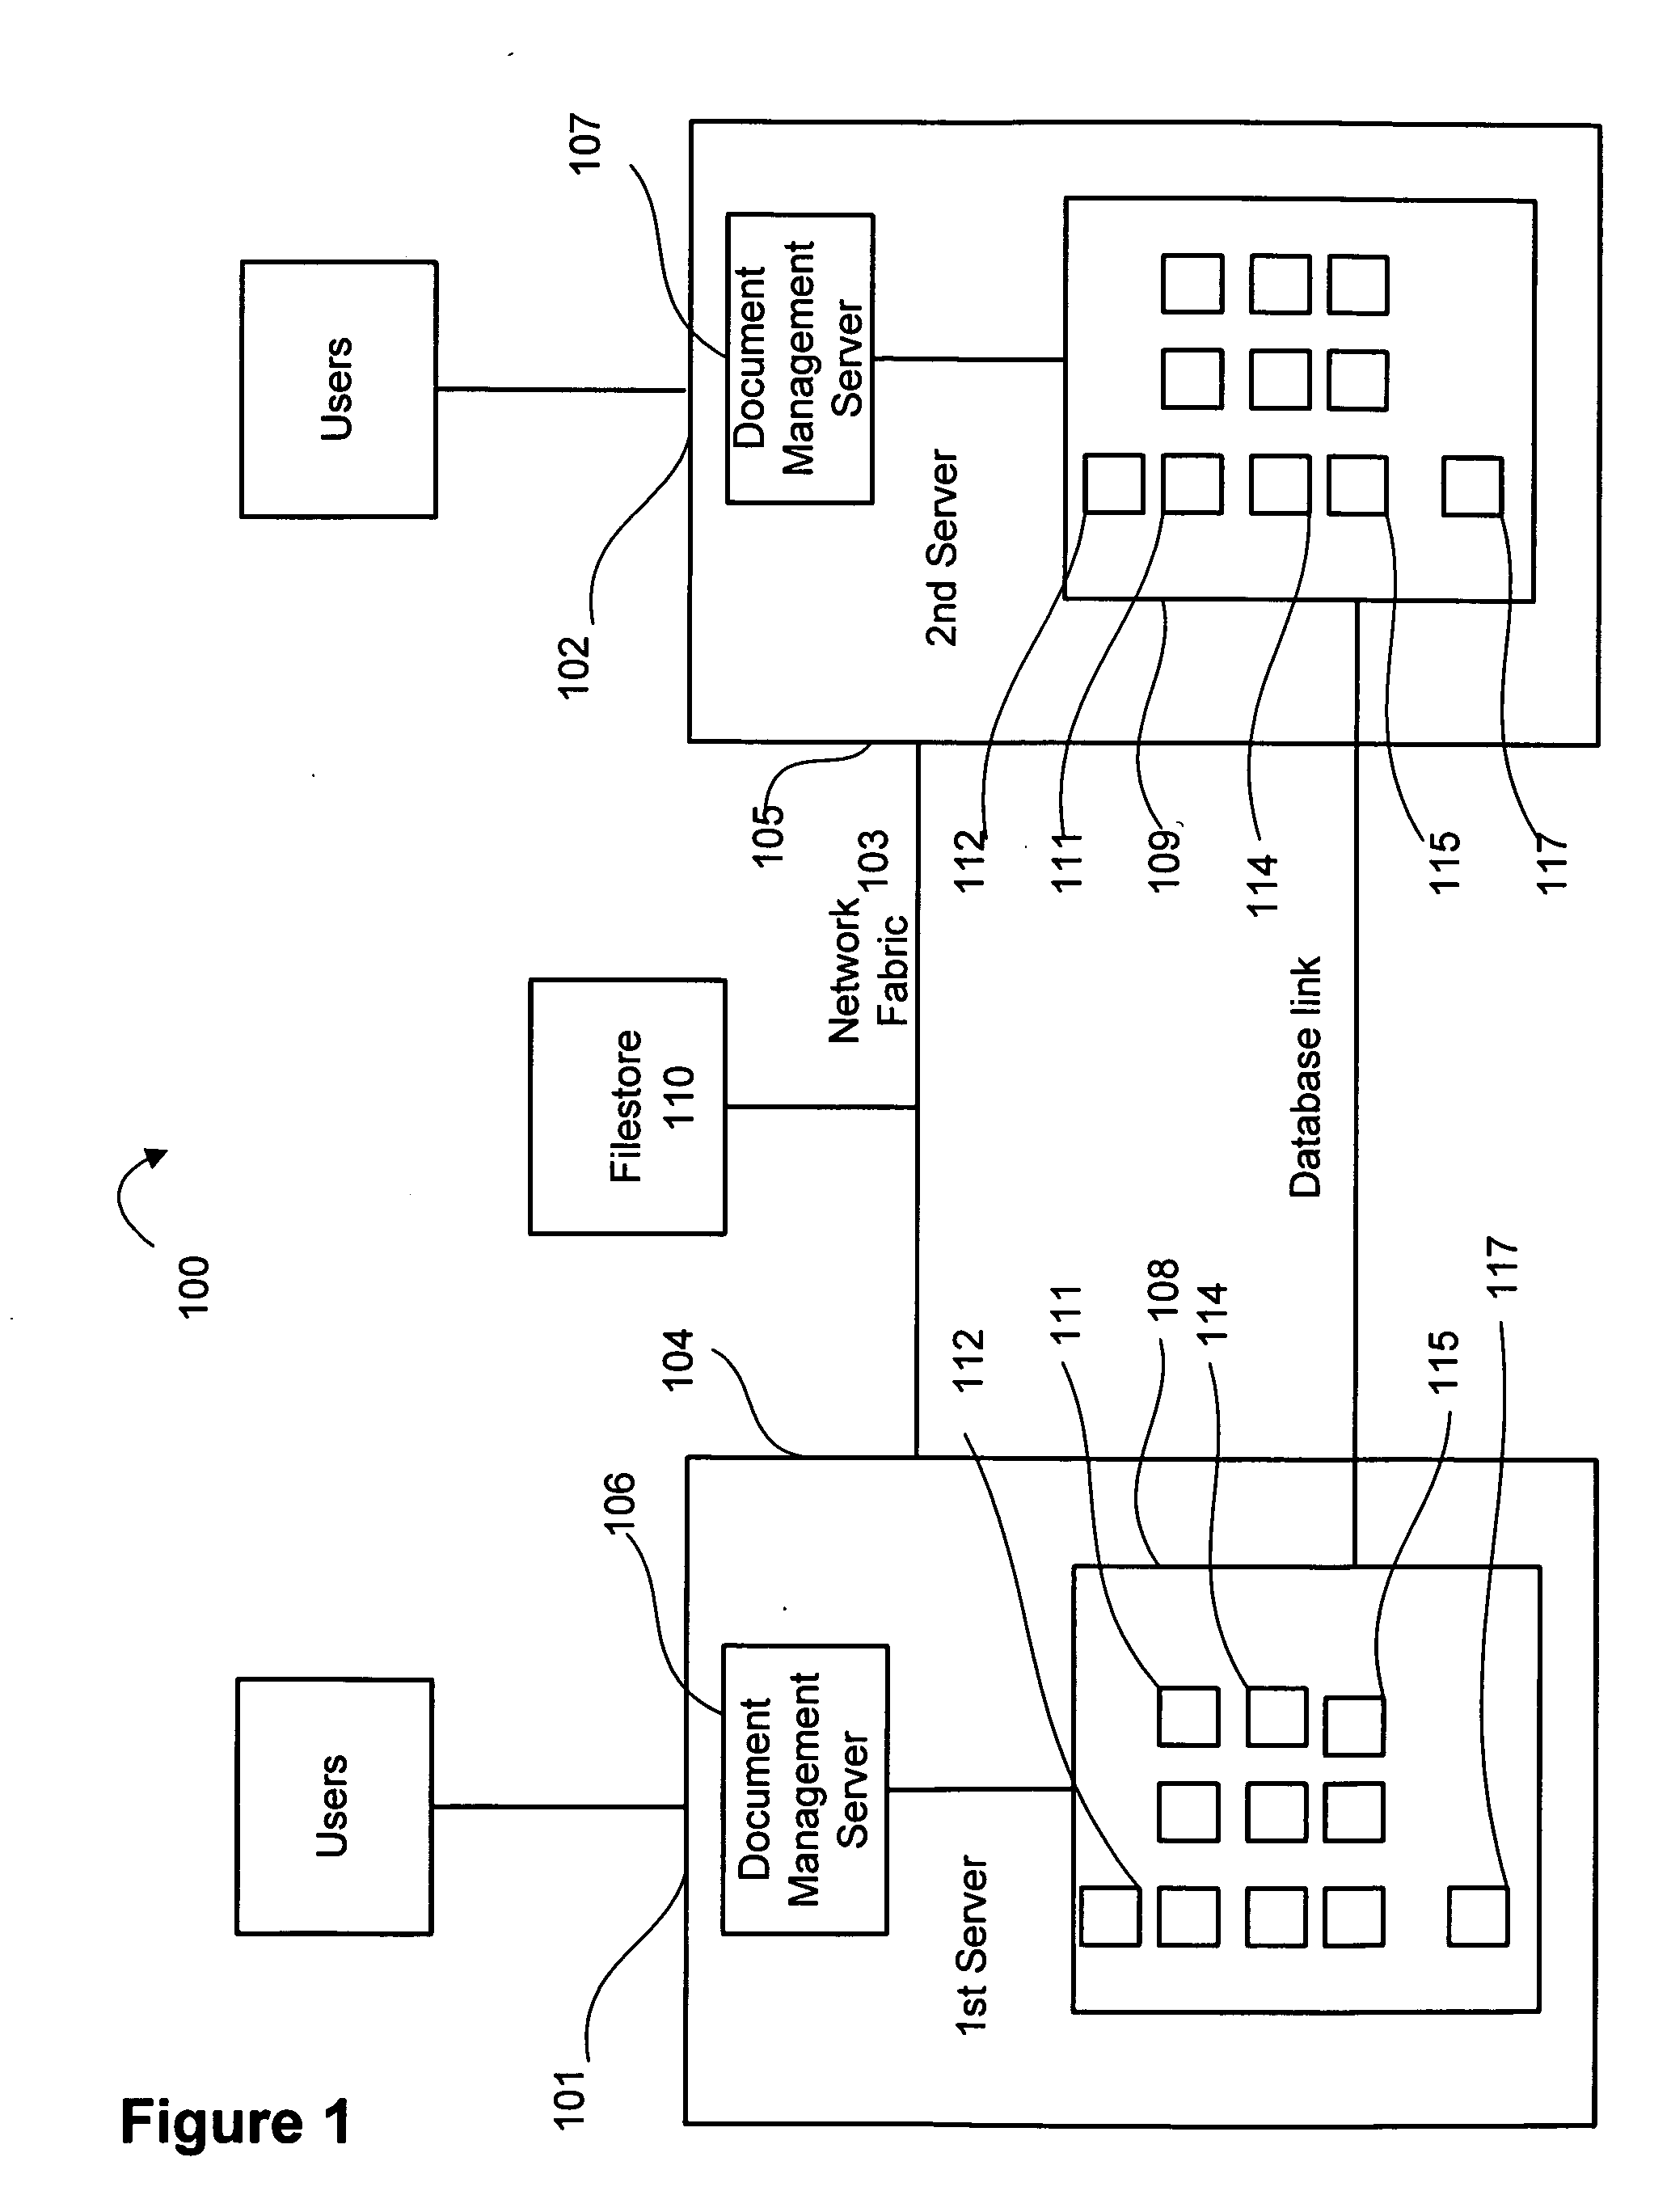 Method for validating system changes by use of a replicated system as a system testbed